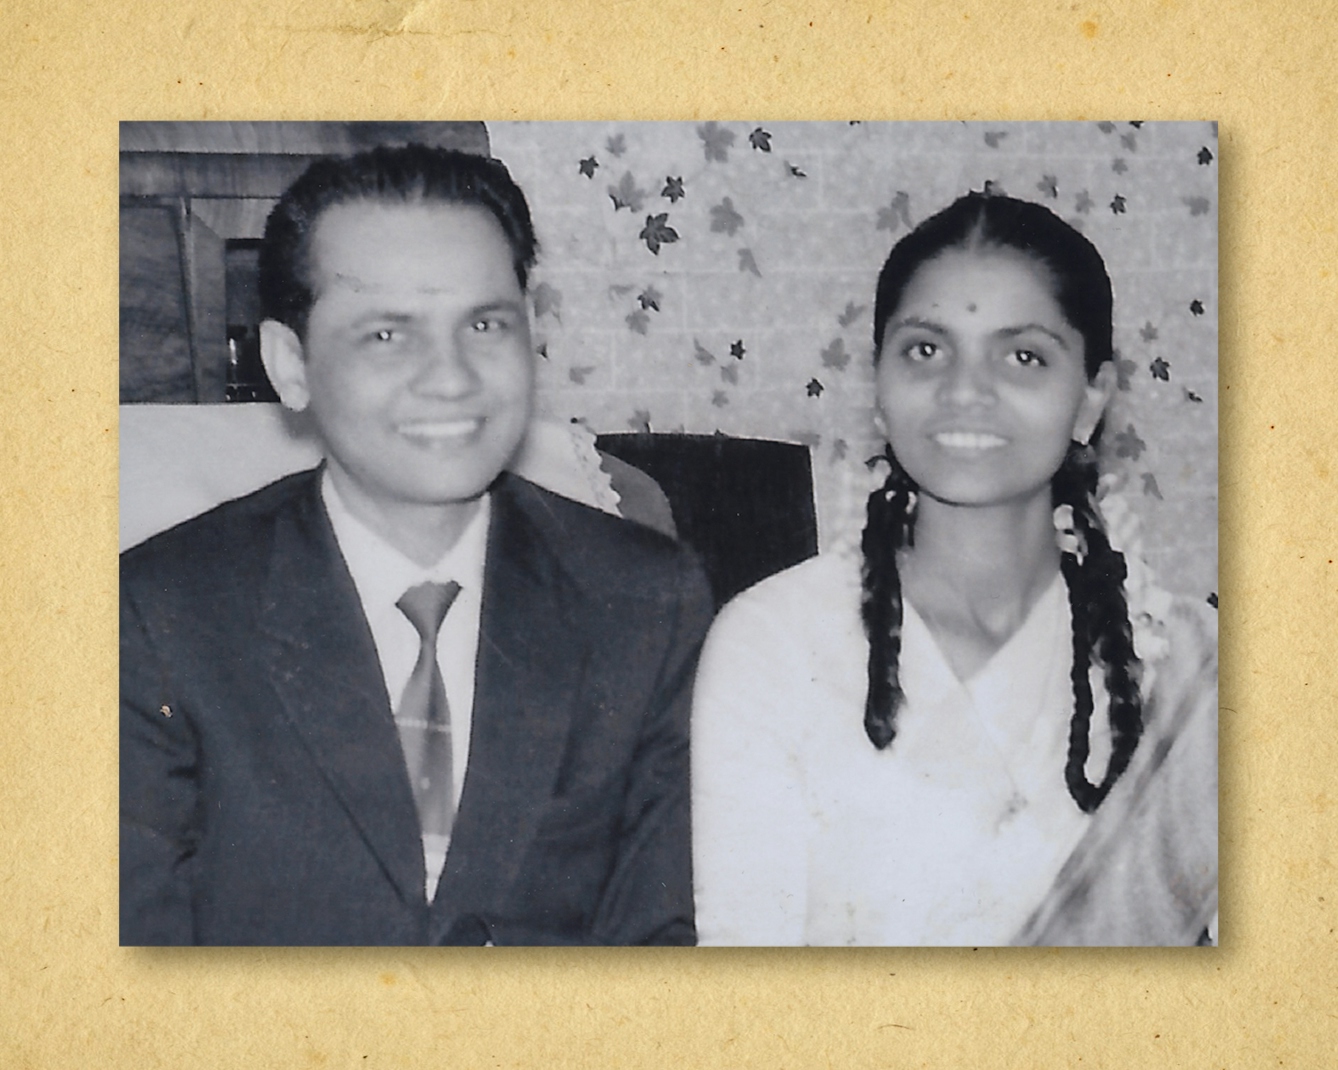 Photograph of a black and white photographic print, resting on a brown paper textured background. The print shows a man and a woman sat side by side smiling to camera. They are both smartly dressed, the man in a suit and tie, and the woman in a dress. Behind them is a patterned wallpaper.